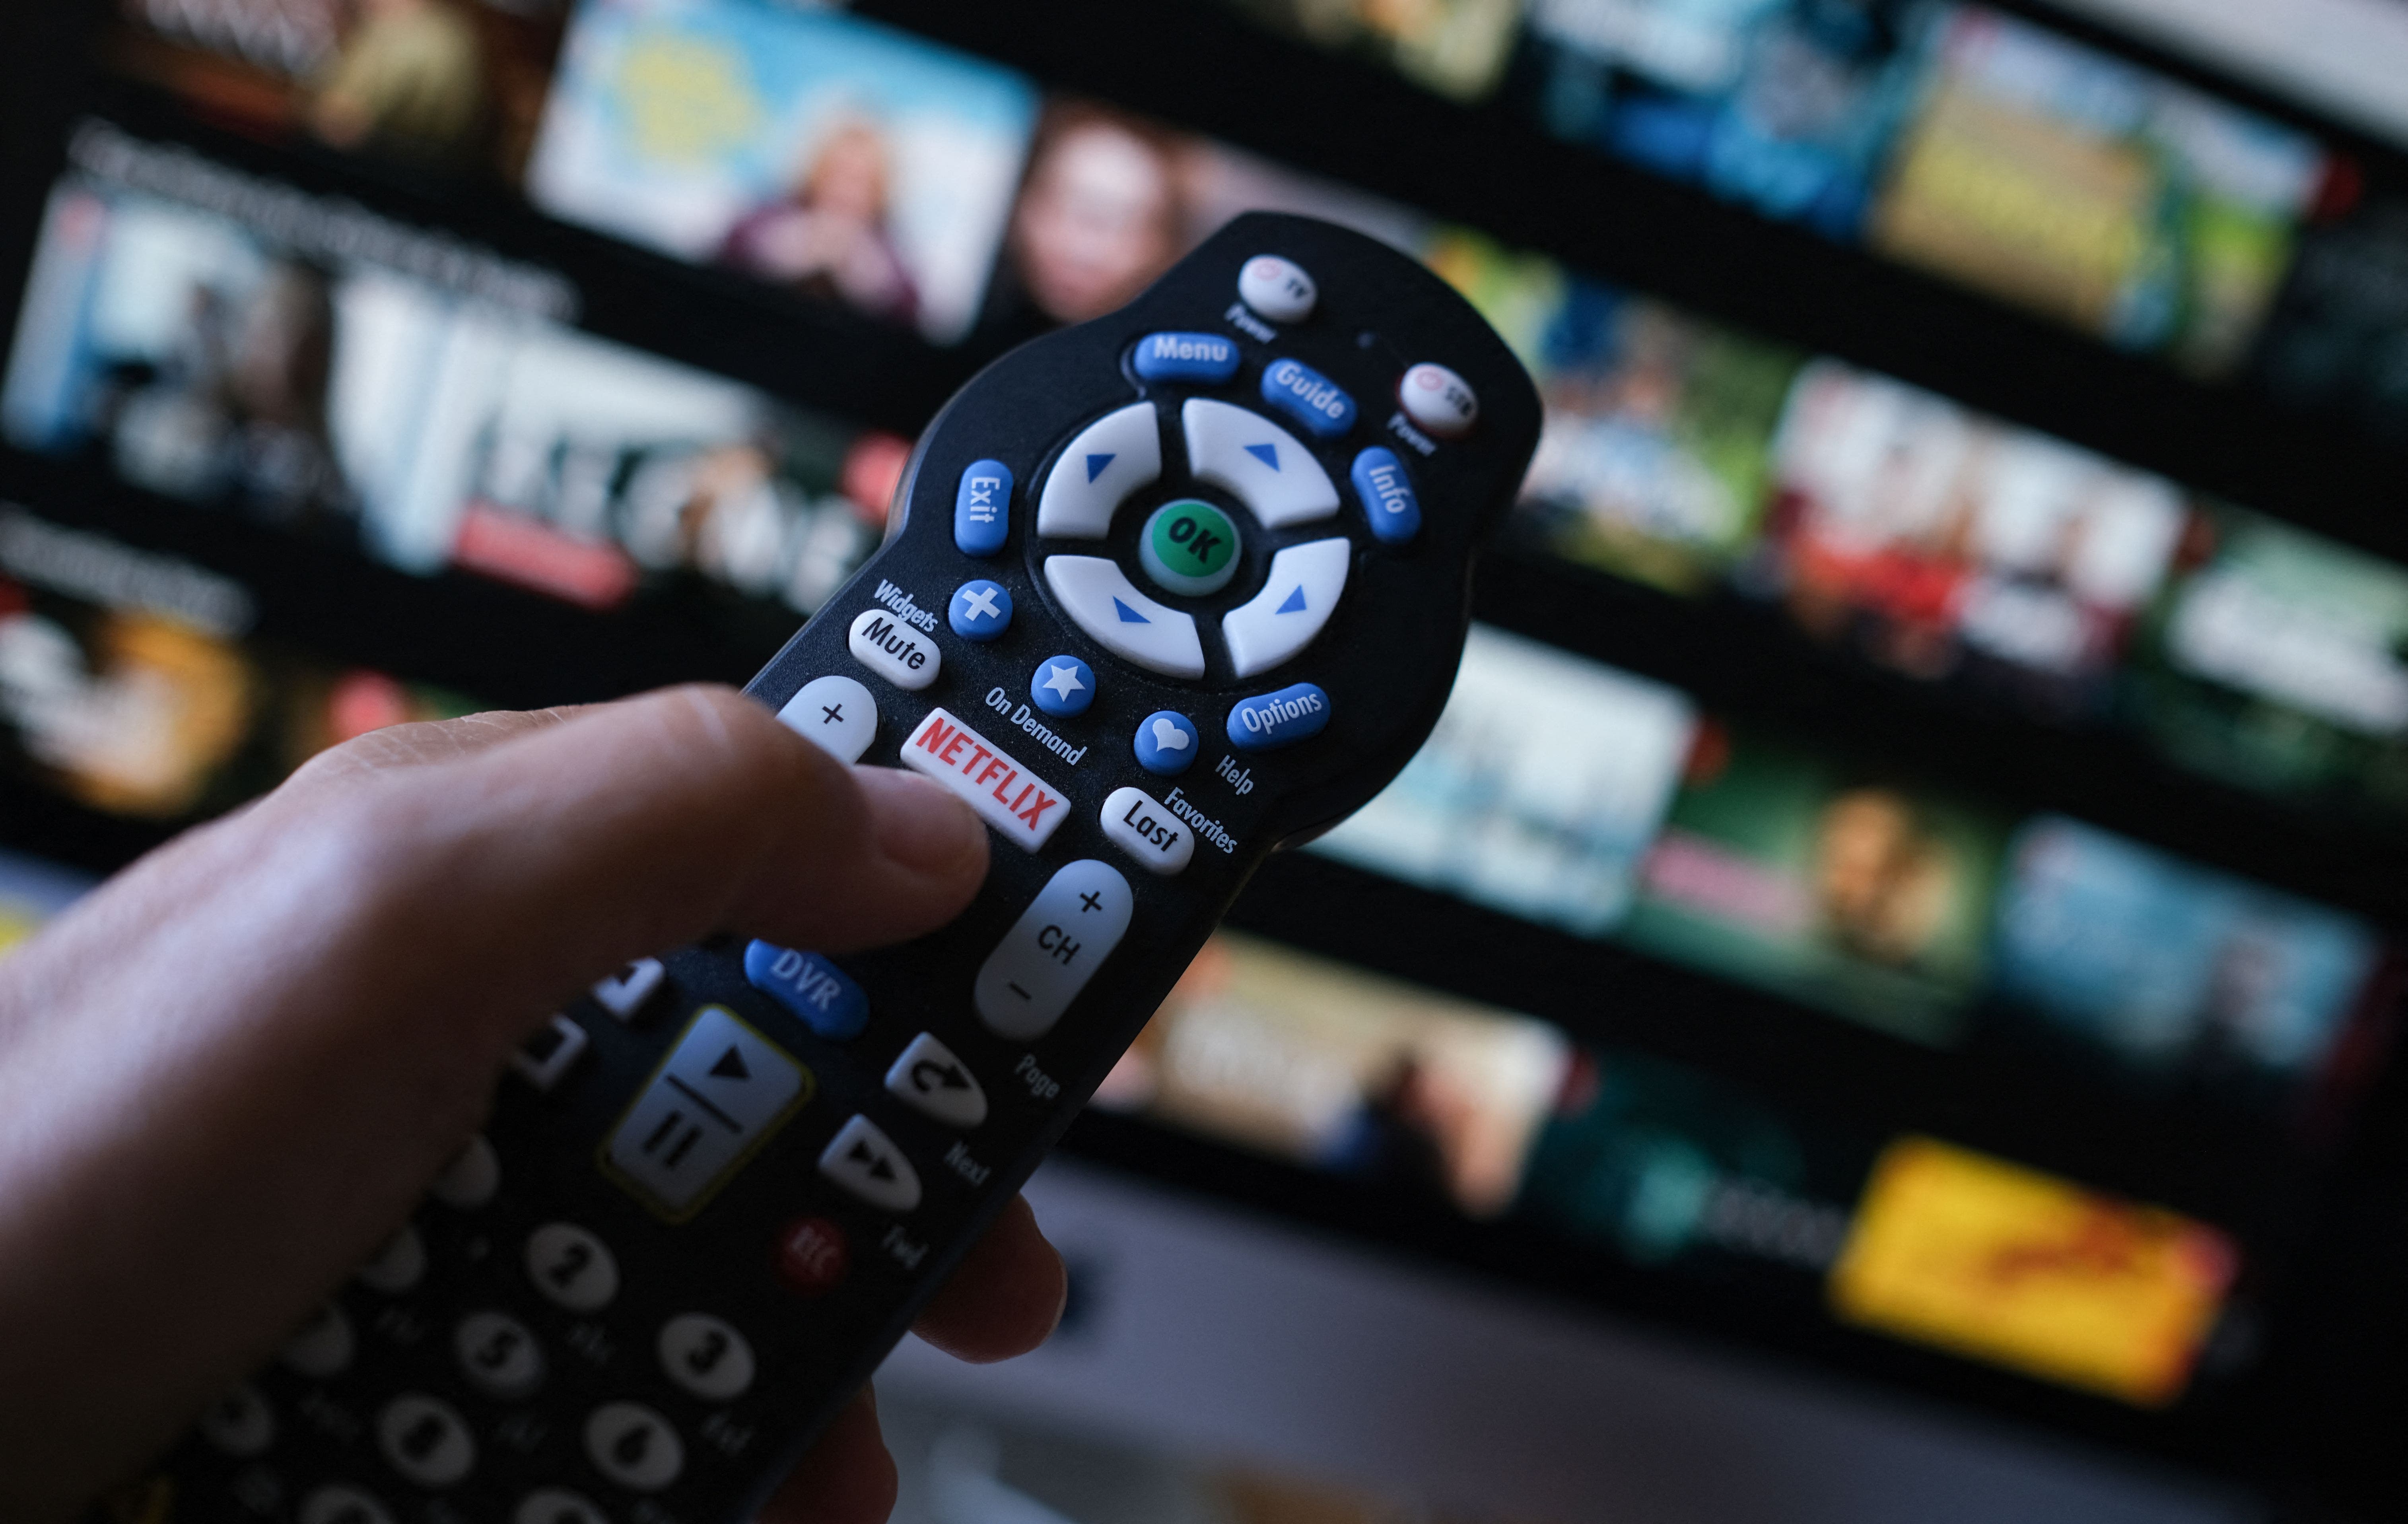 Your TV is spying on you, but you can turn it off